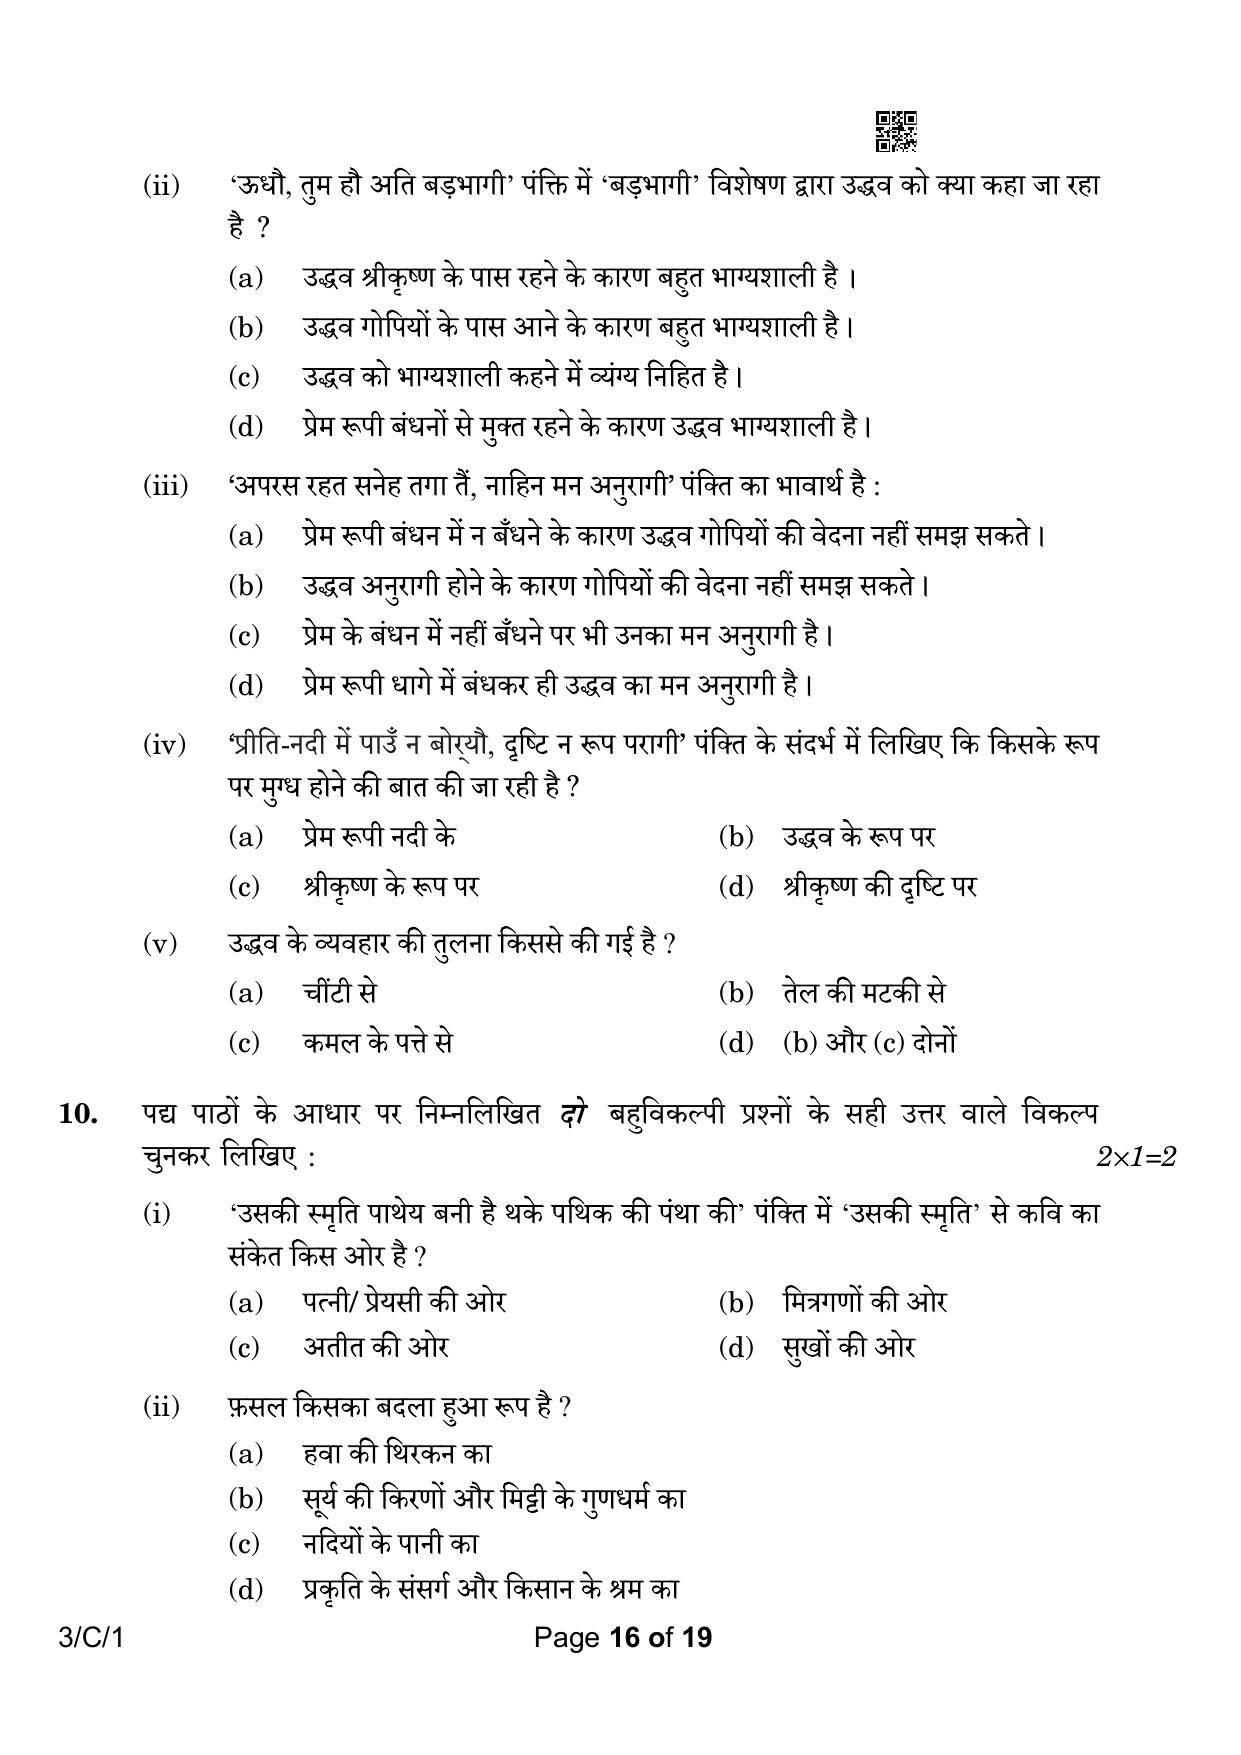 CBSE Class 10 3-1 Hindi A 2023 (Compartment) Question Paper - Page 16